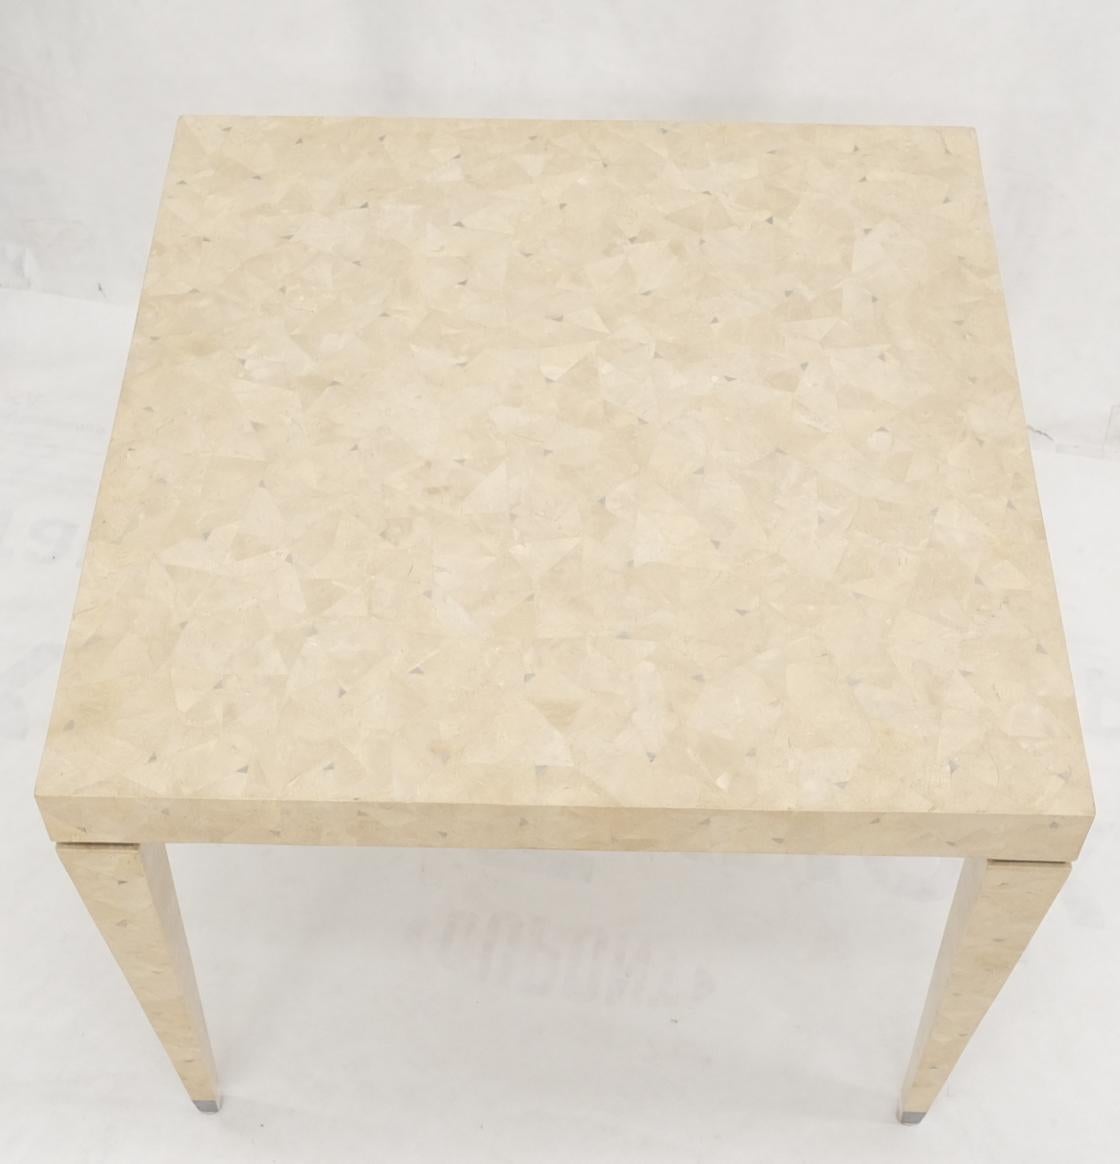 Tessellated Stone & Mirrors Square Mid-Century Modern Dining Game Table 1